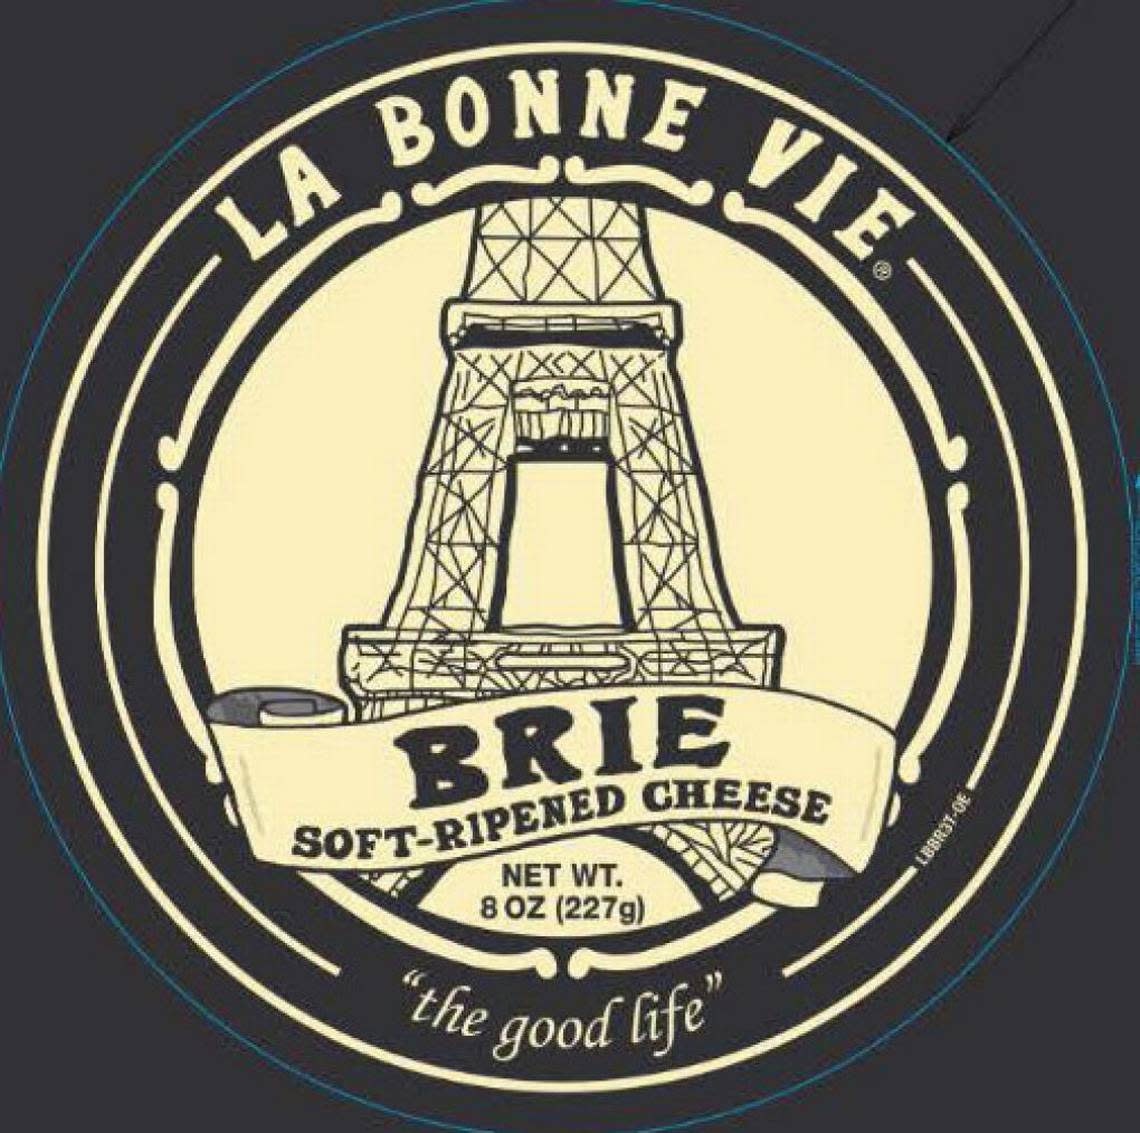 One of the La Bonne Vie cheeses recalled, the Soft-Ripened Brie